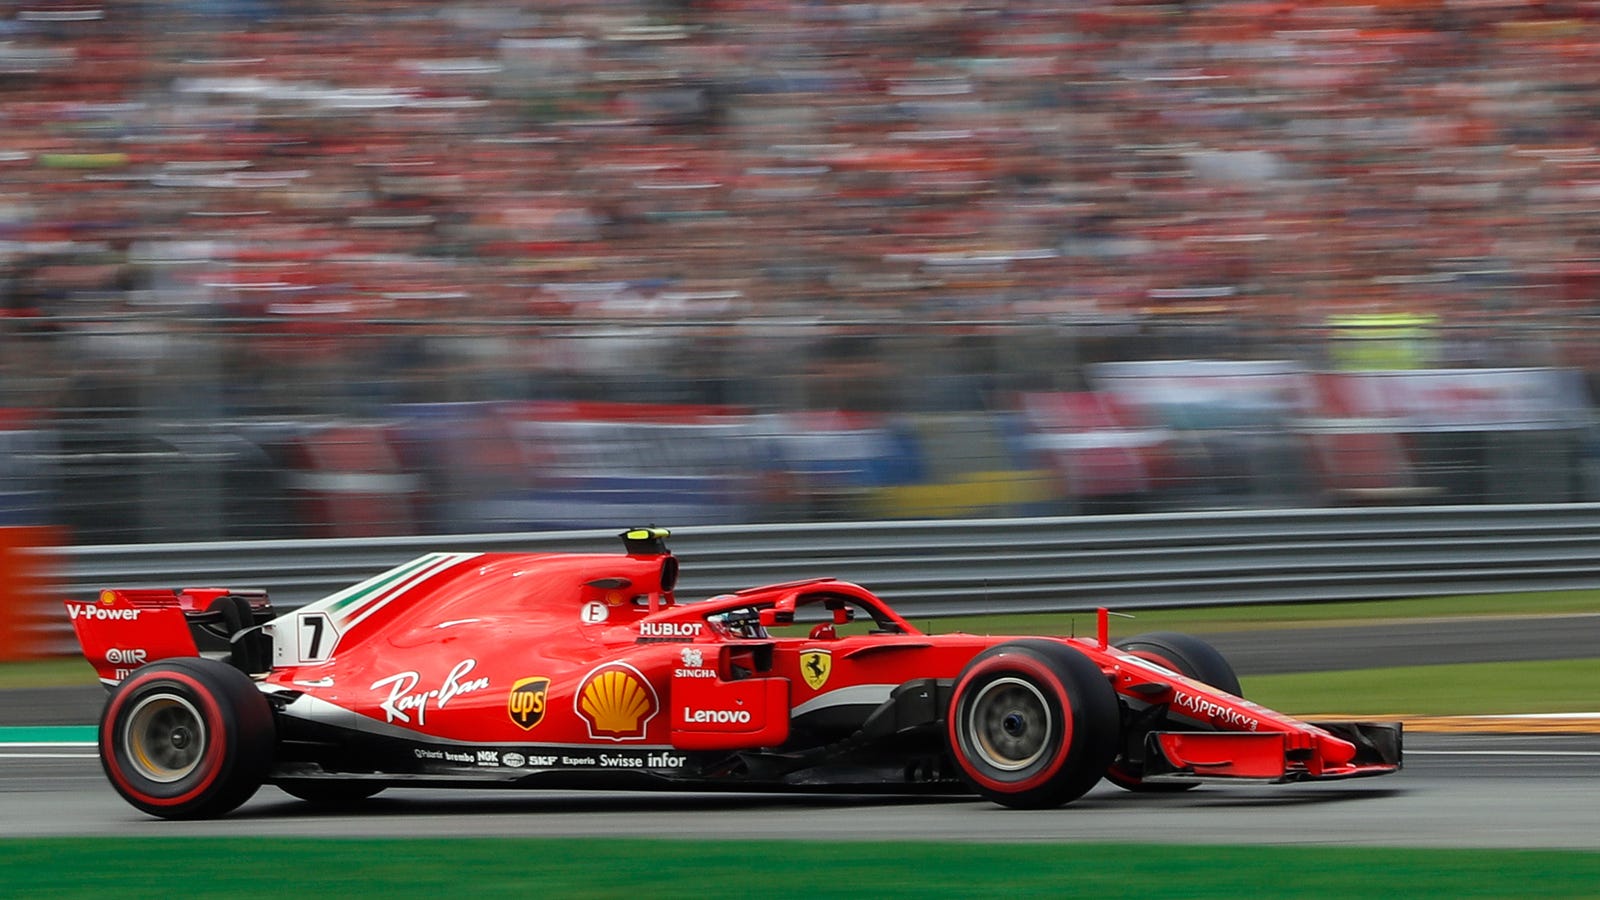 Kimi Raikkonen Sets the Fastest Lap in Formula One History With a